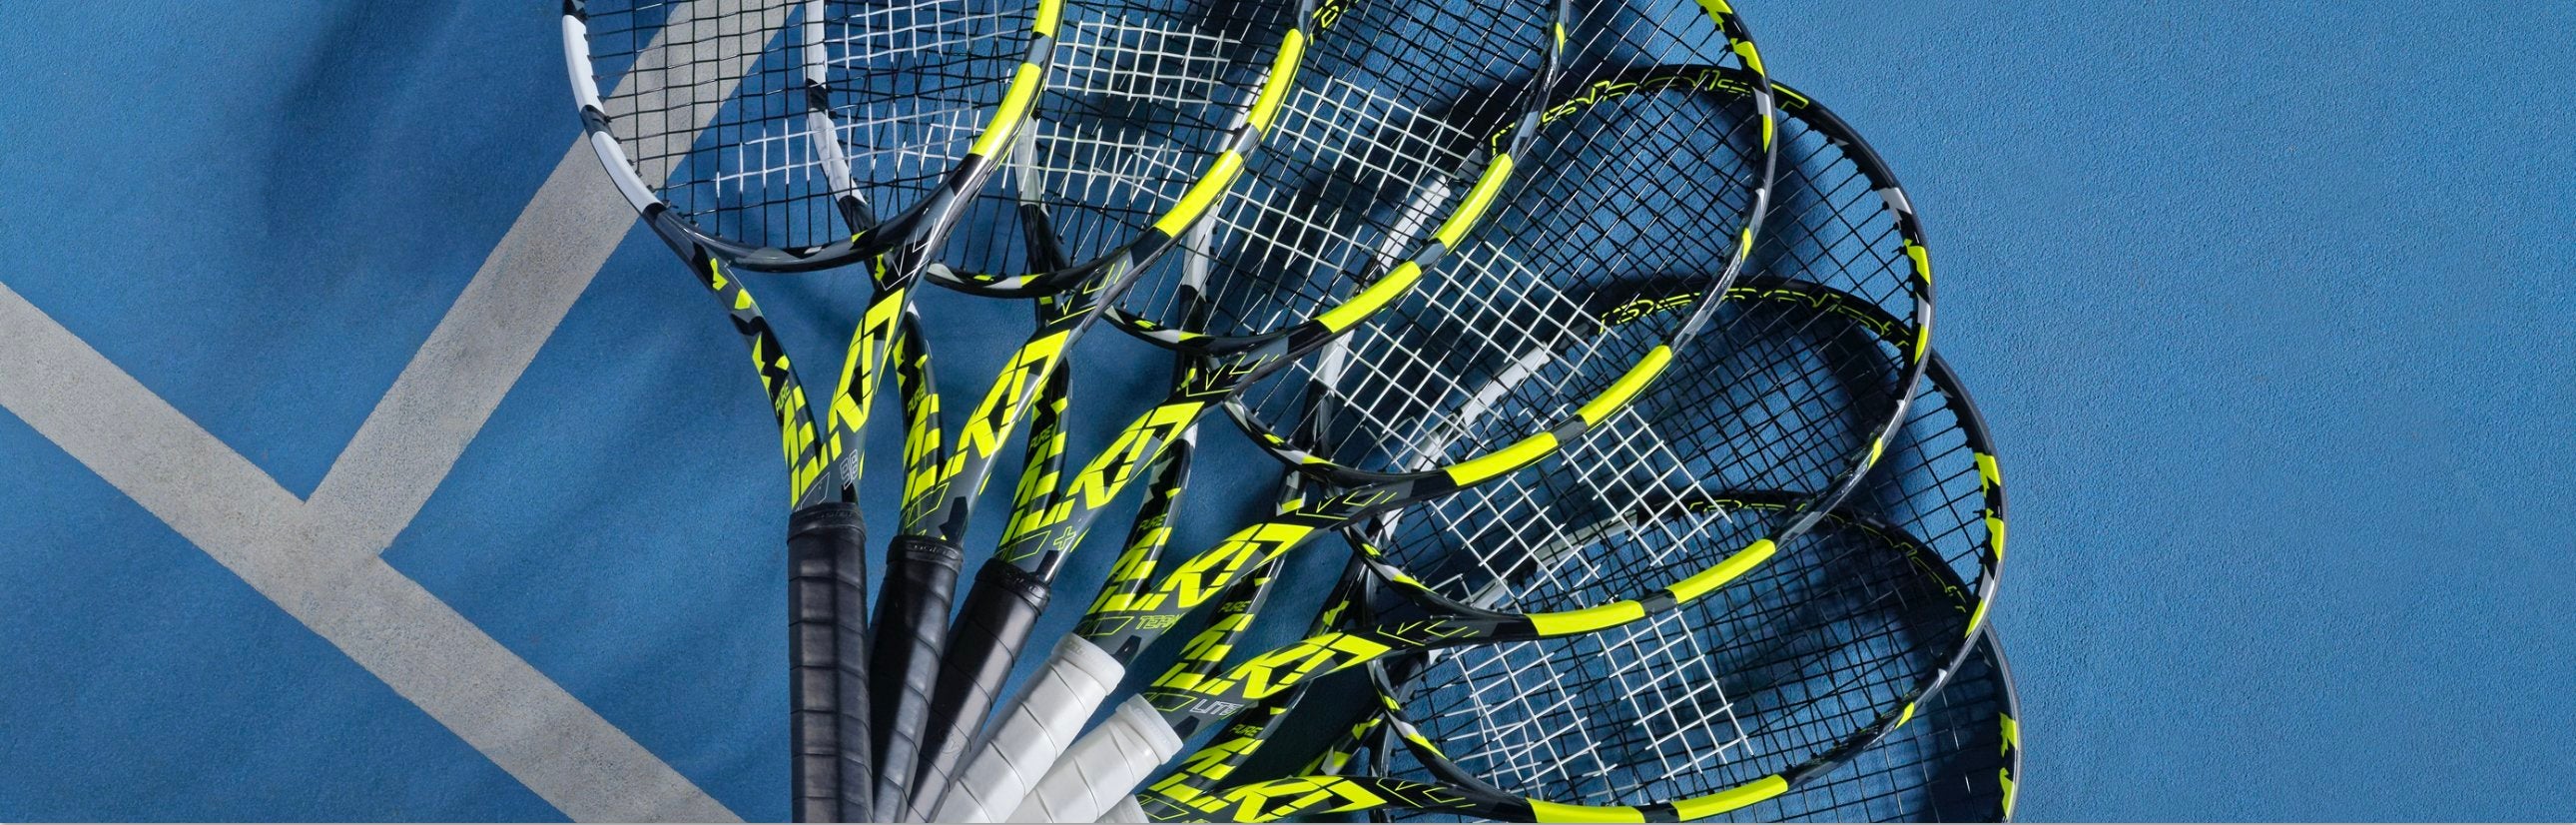 The new 2023 Babolat Pure Aero Racquets available at racquetpoint.com